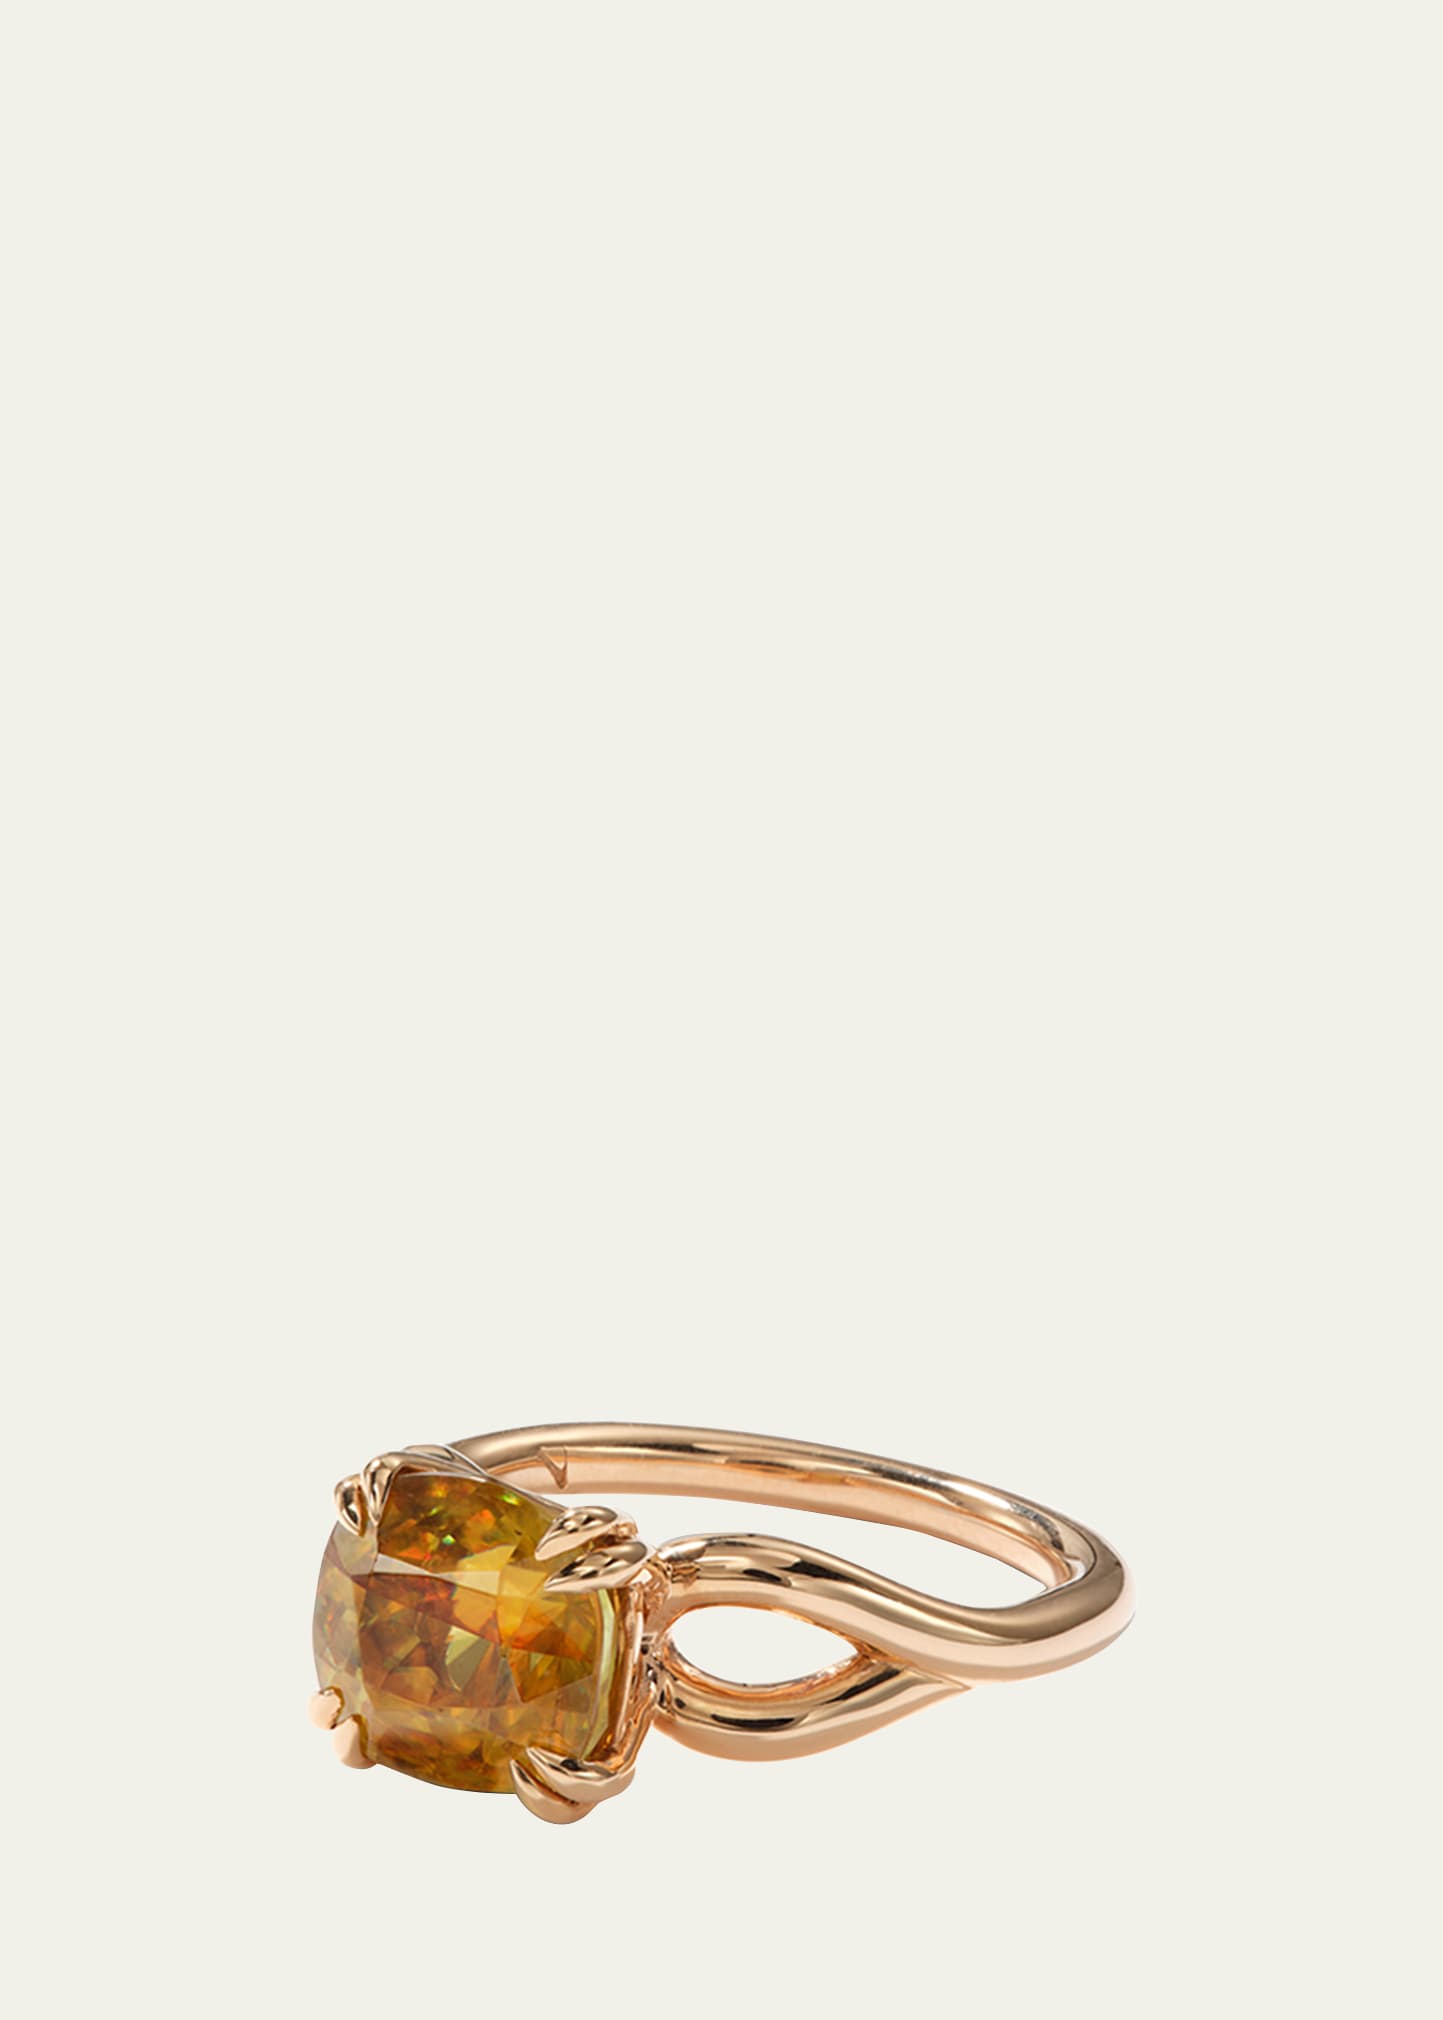 Nak Armstrong 20k Rose Gold Languid Solitaire Ring With Sphene In Rg